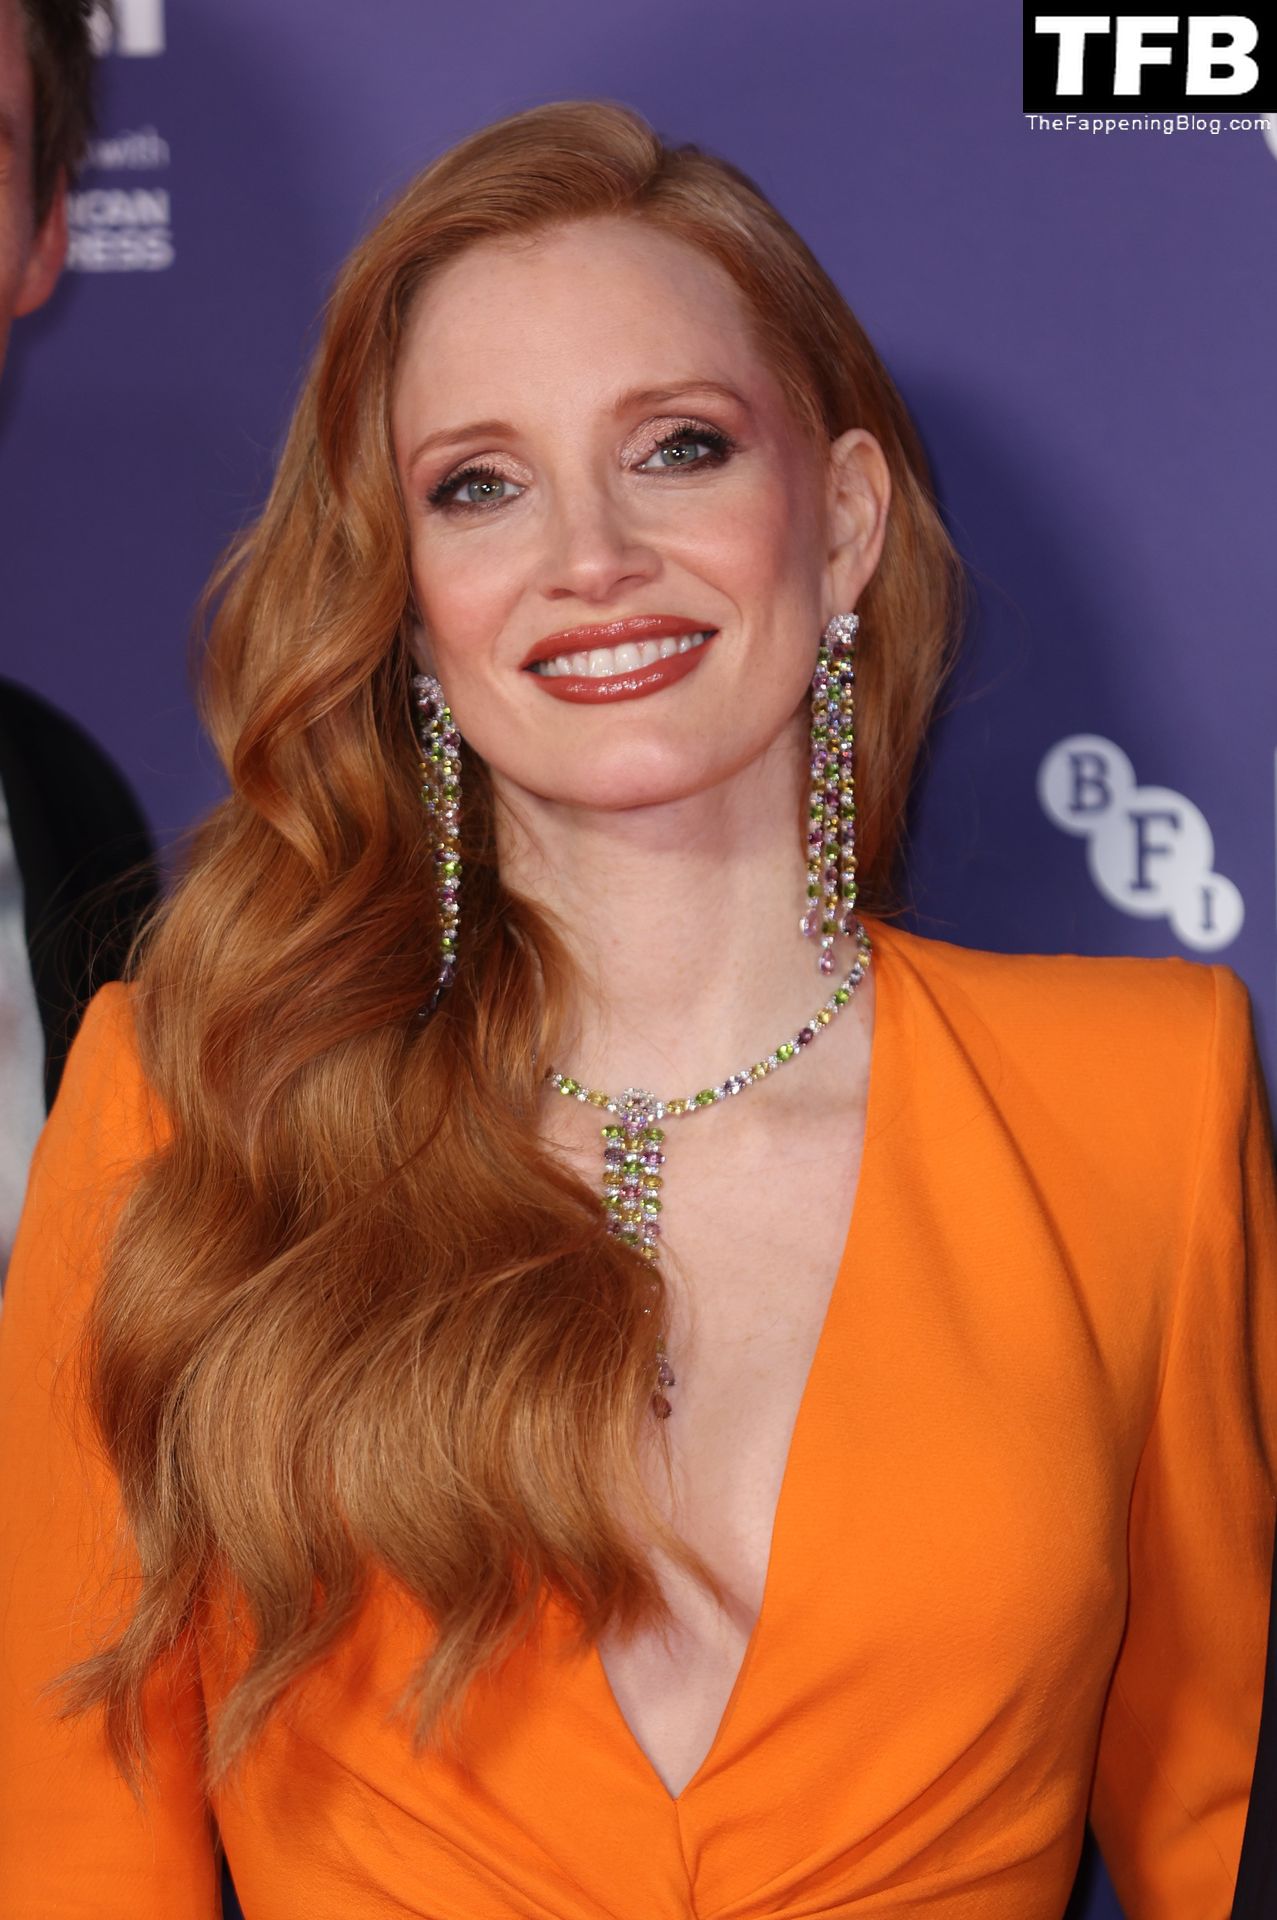 Jessica Chastain Sexy The Fappening Blog 2 - Jessica Chastain Poses for Photographers Upon Arrival for the Premiere of the Film “The Good Nurse” in London (150 Photos)